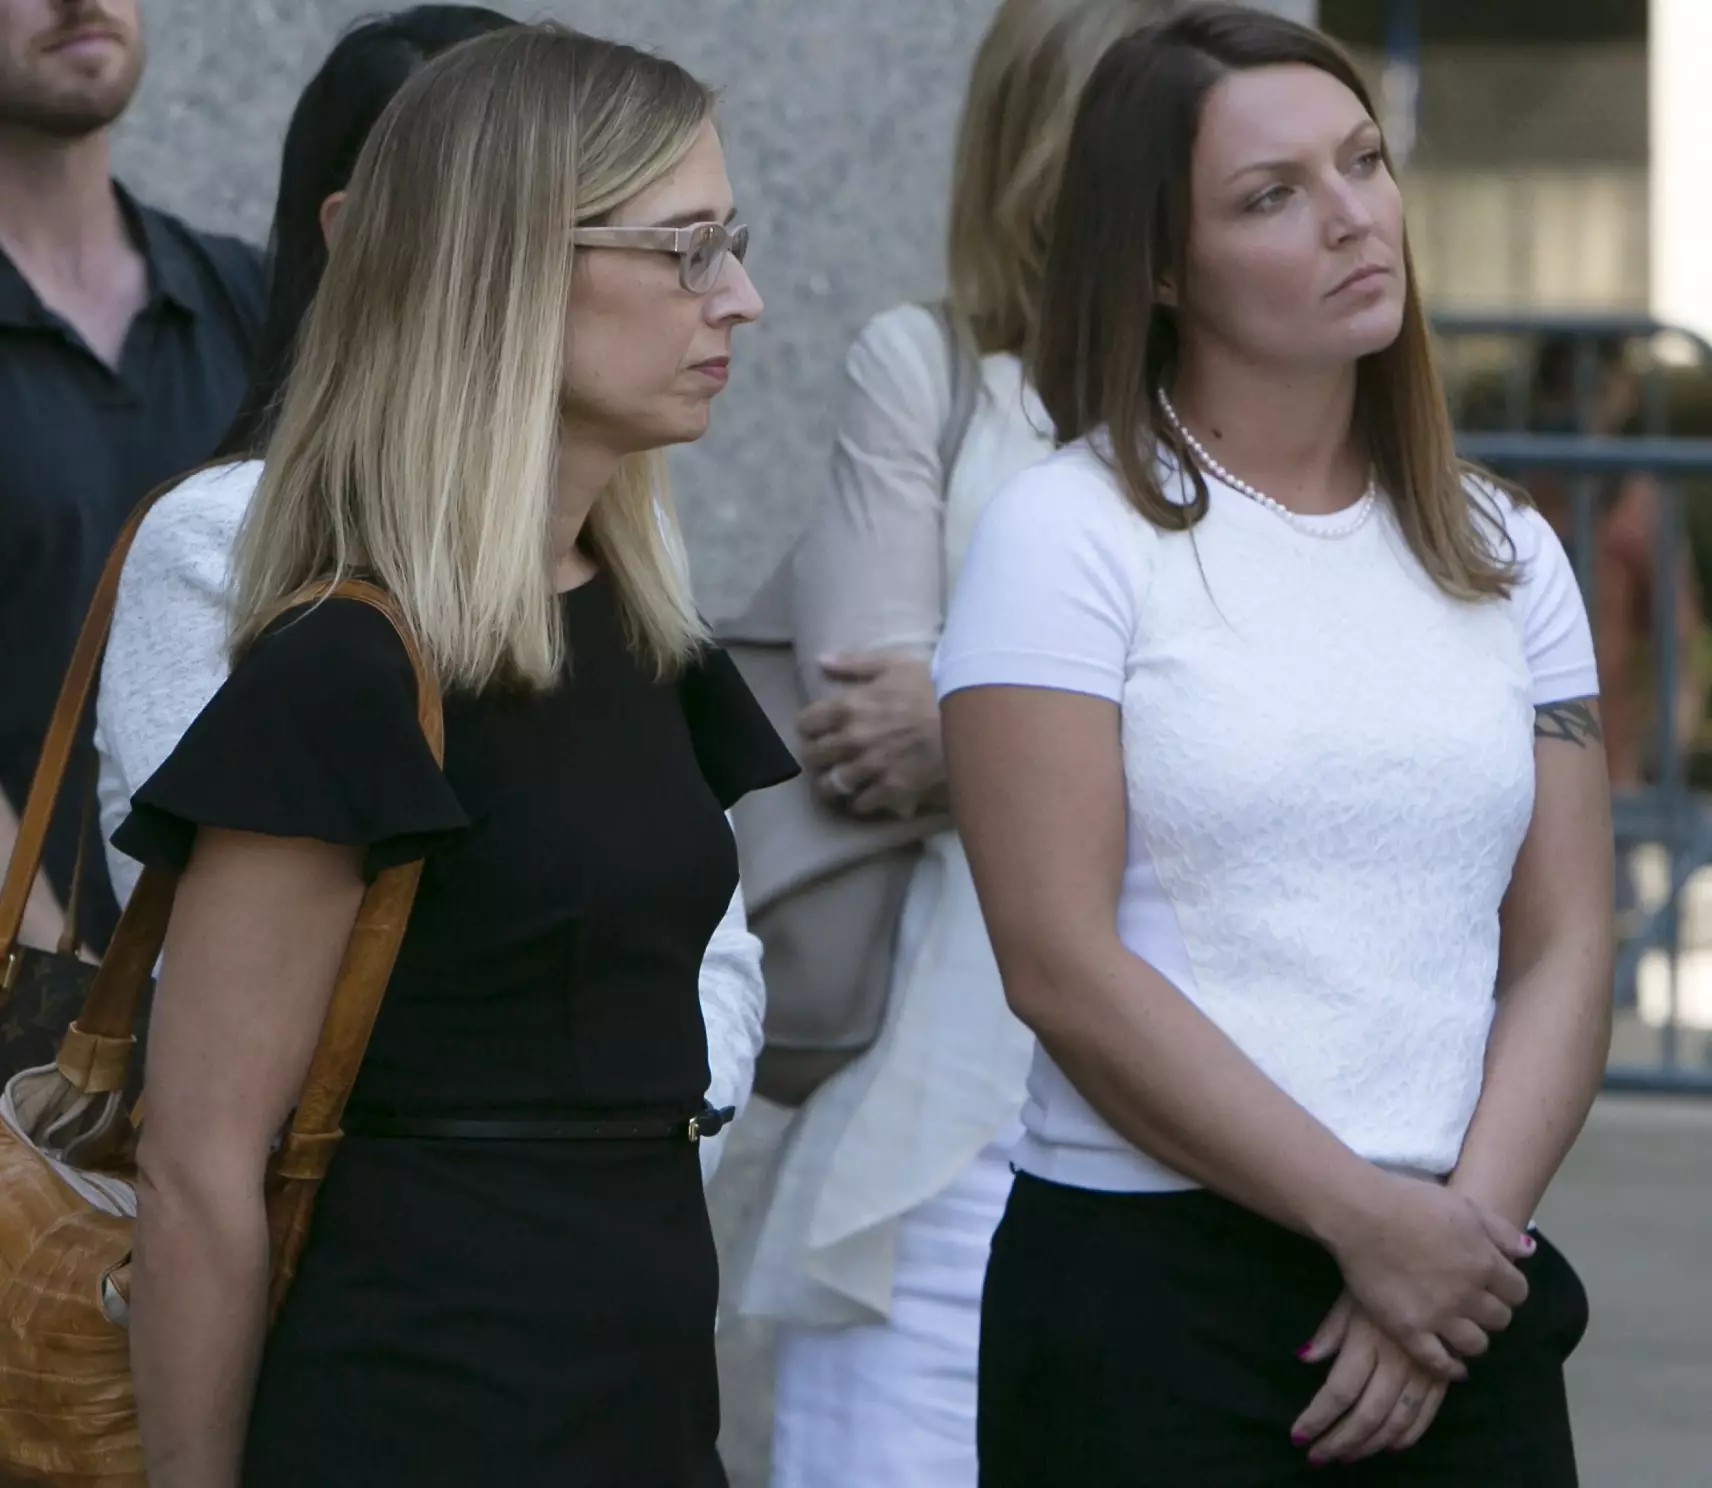 Annie Farmer (left) and Courtney Wild both claim to have been molested by Epstein as teenagers.